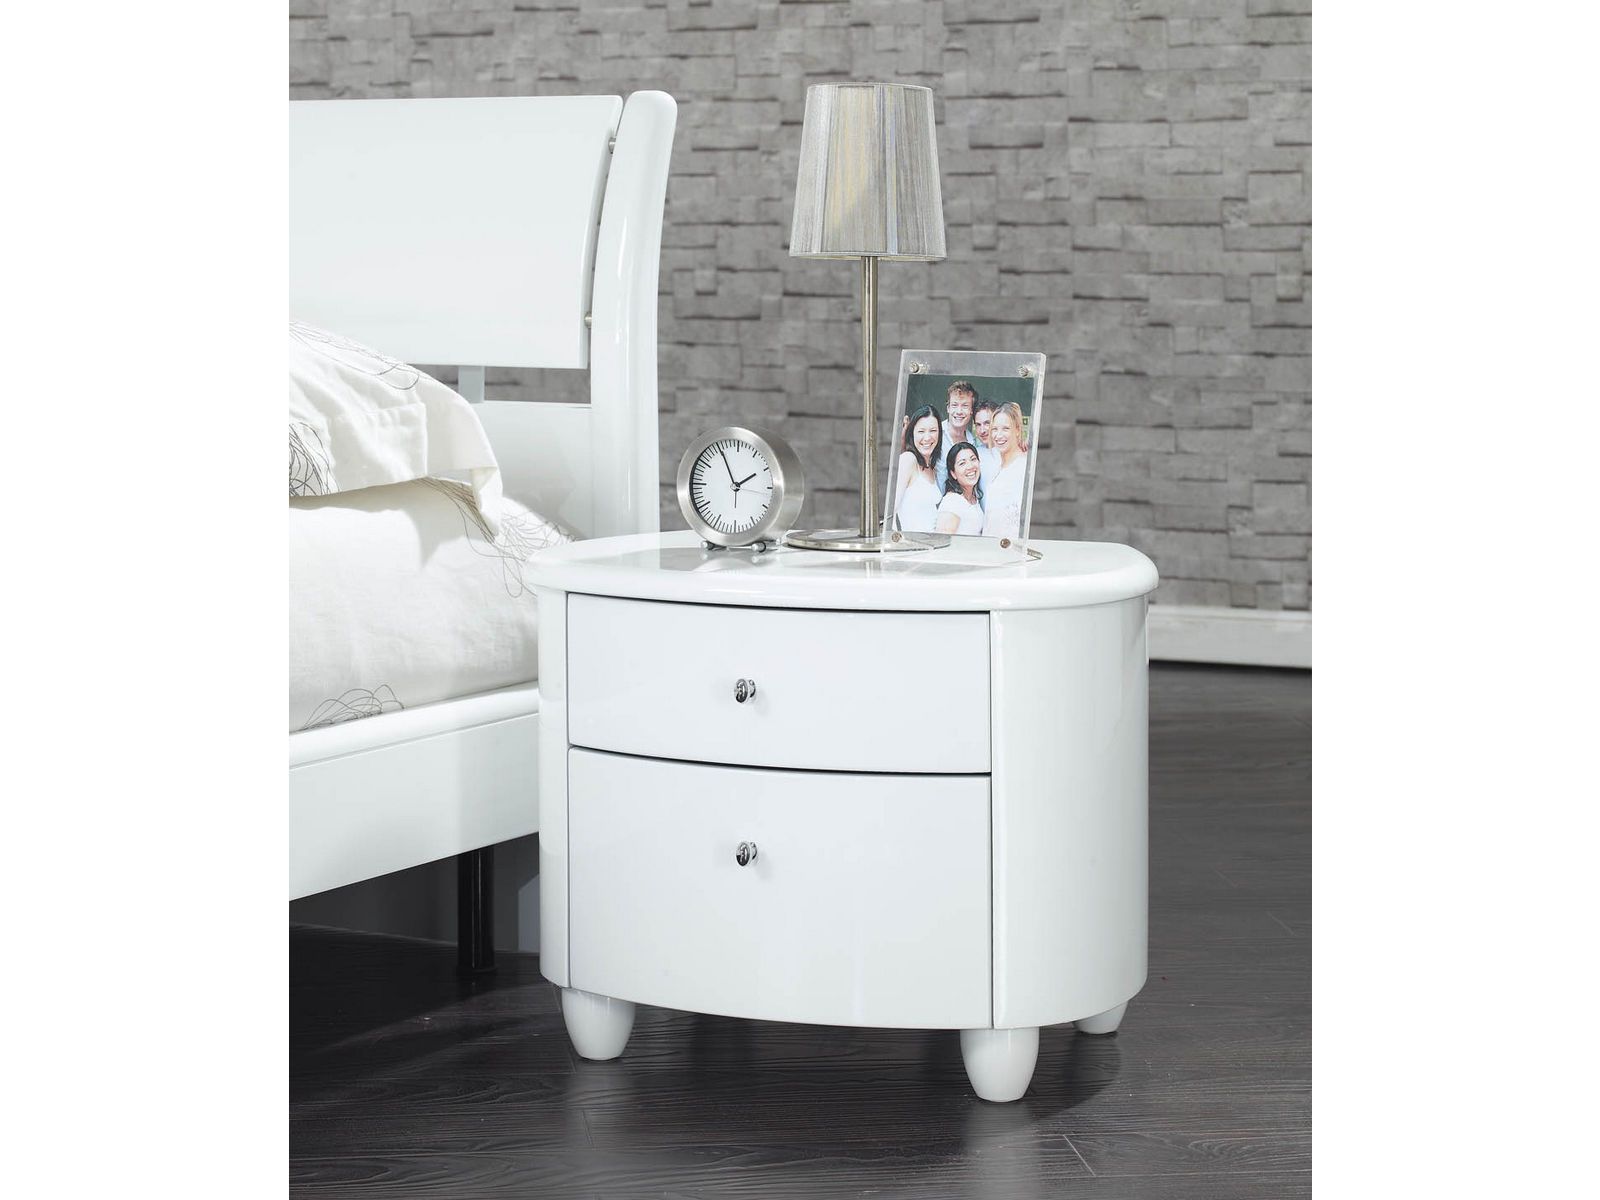 Birlea Aztec 2 Drawer Nightstand Bedside Cabinet – White Gloss Lacquer Intended For Most Current White Lacquer 2 Drawer Desks (View 7 of 15)